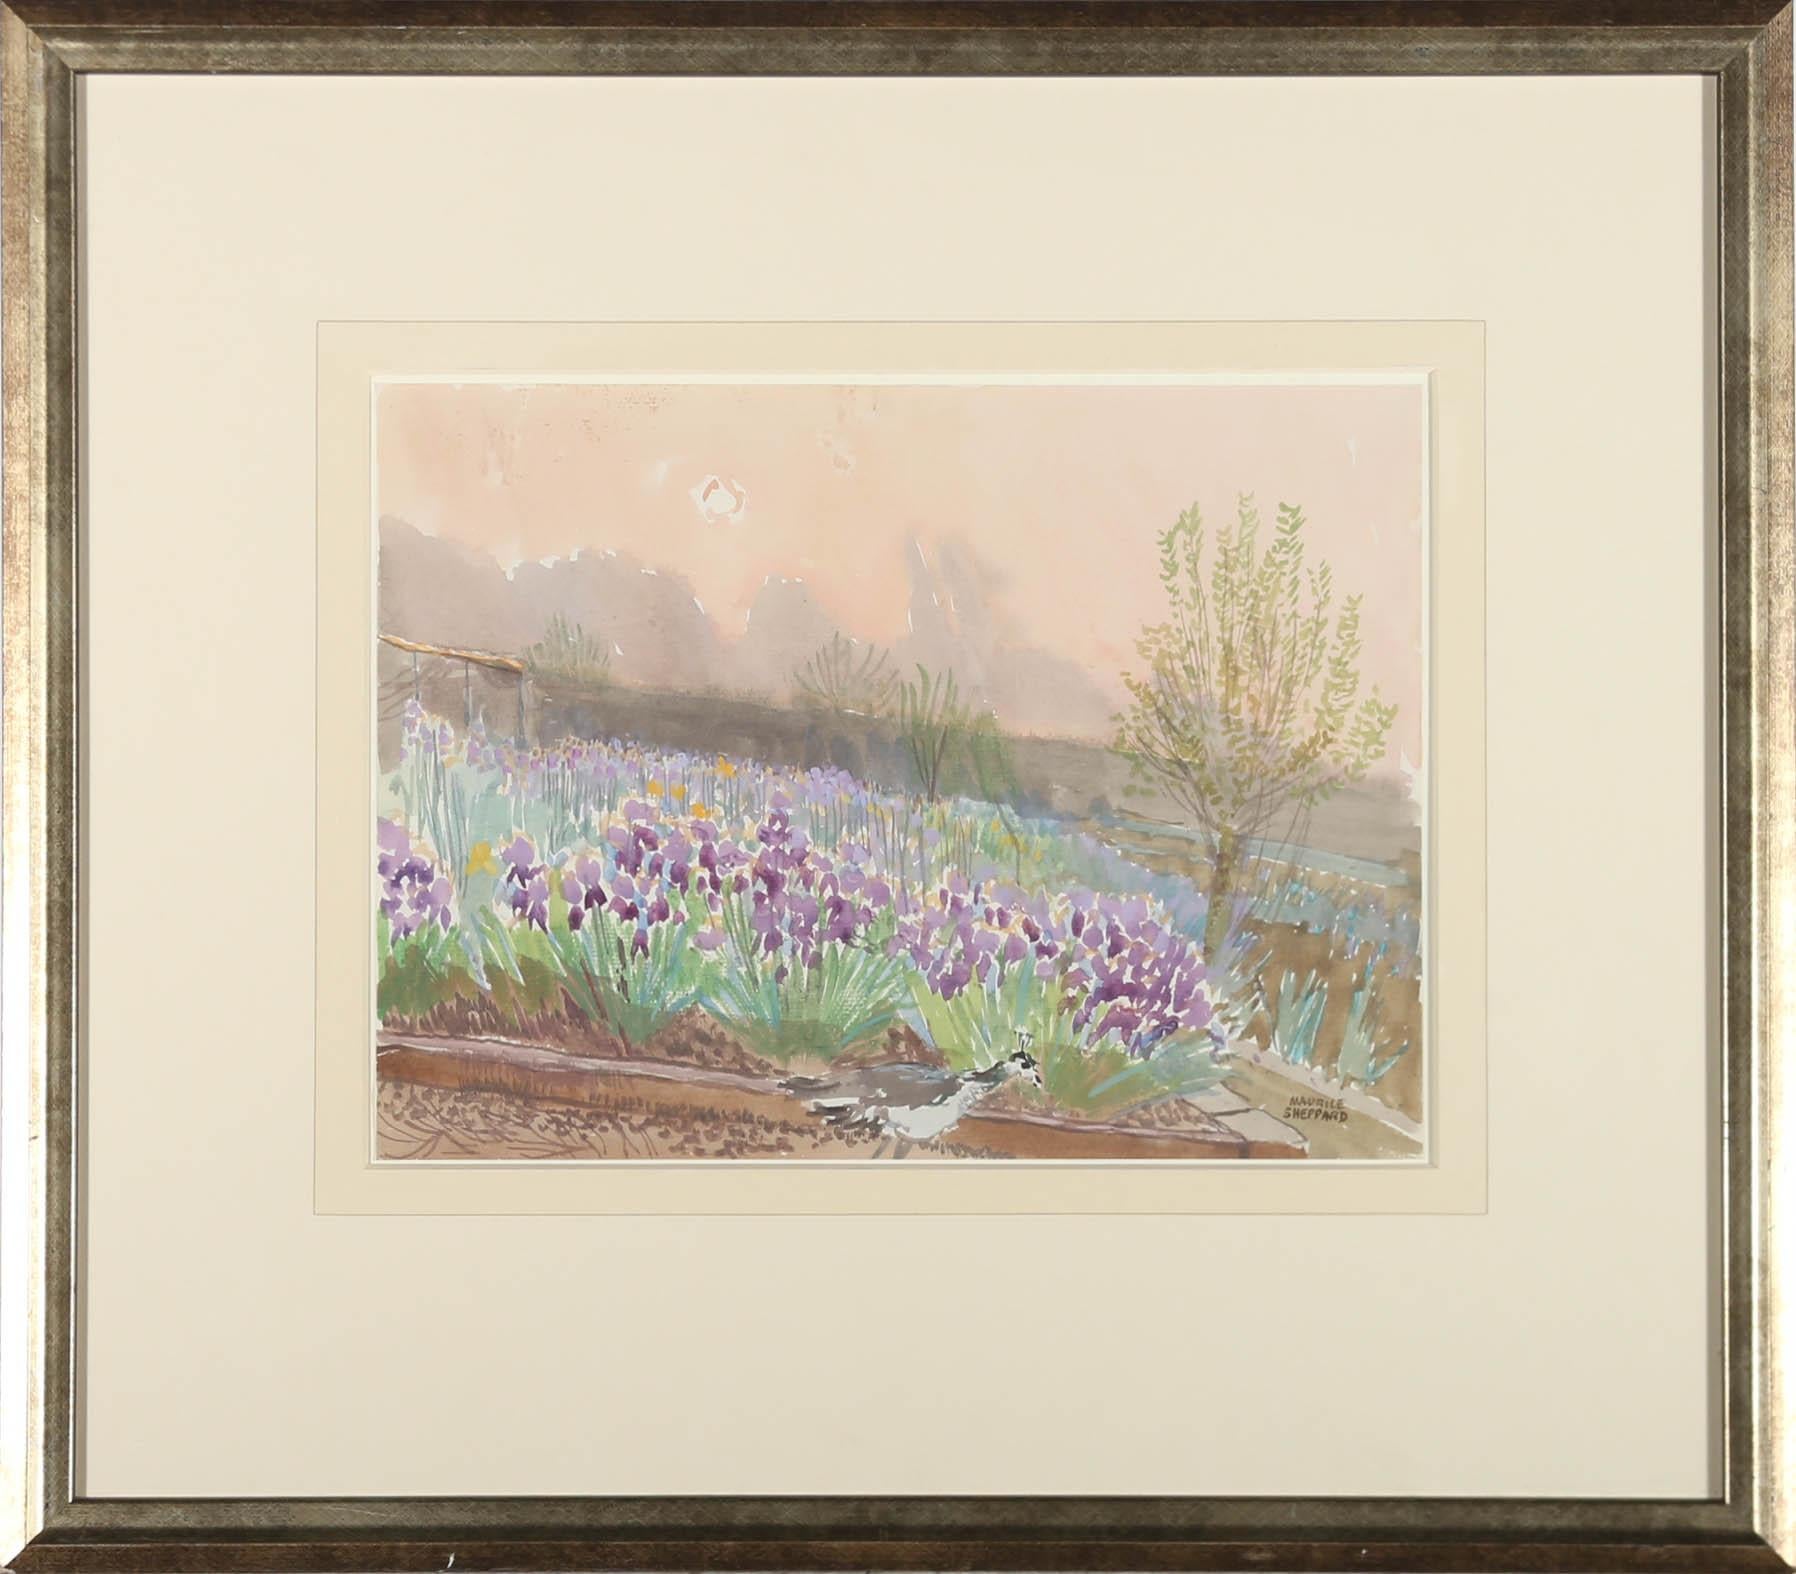 A charming study of a garden filled with irises with a peacock in the foreground. Signed to the lower right. Titled to the reverse. Presented in a gilt frame. On paper.